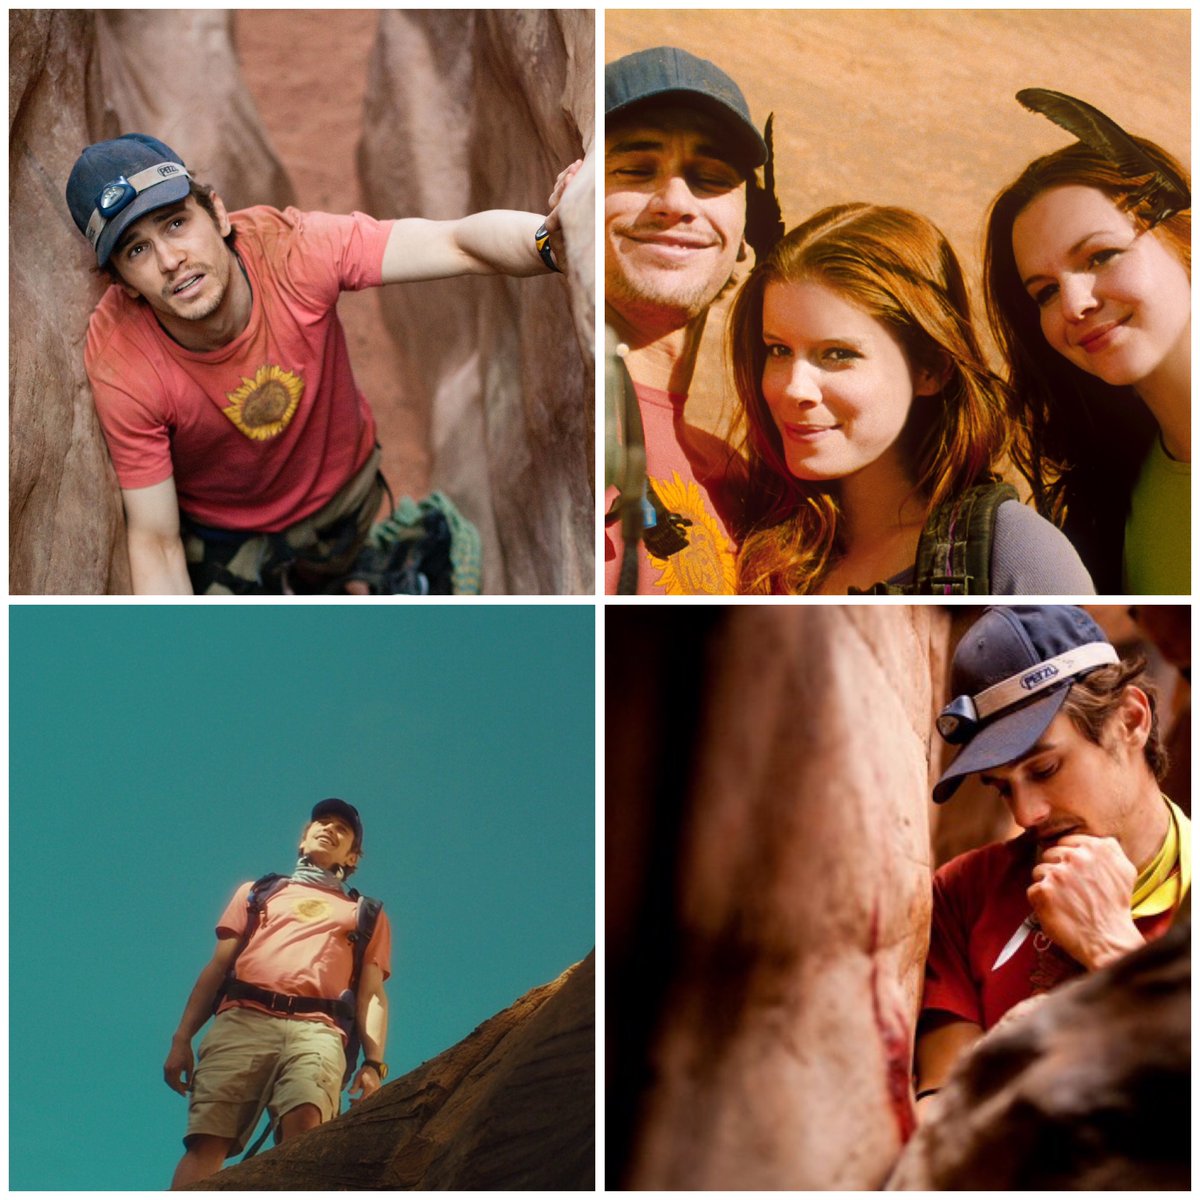 November 5, 2010: On this day in film history, 𝟏𝟐𝟕 𝐇𝐎𝐔𝐑𝐒 was released.

#127Hours #AronRalston